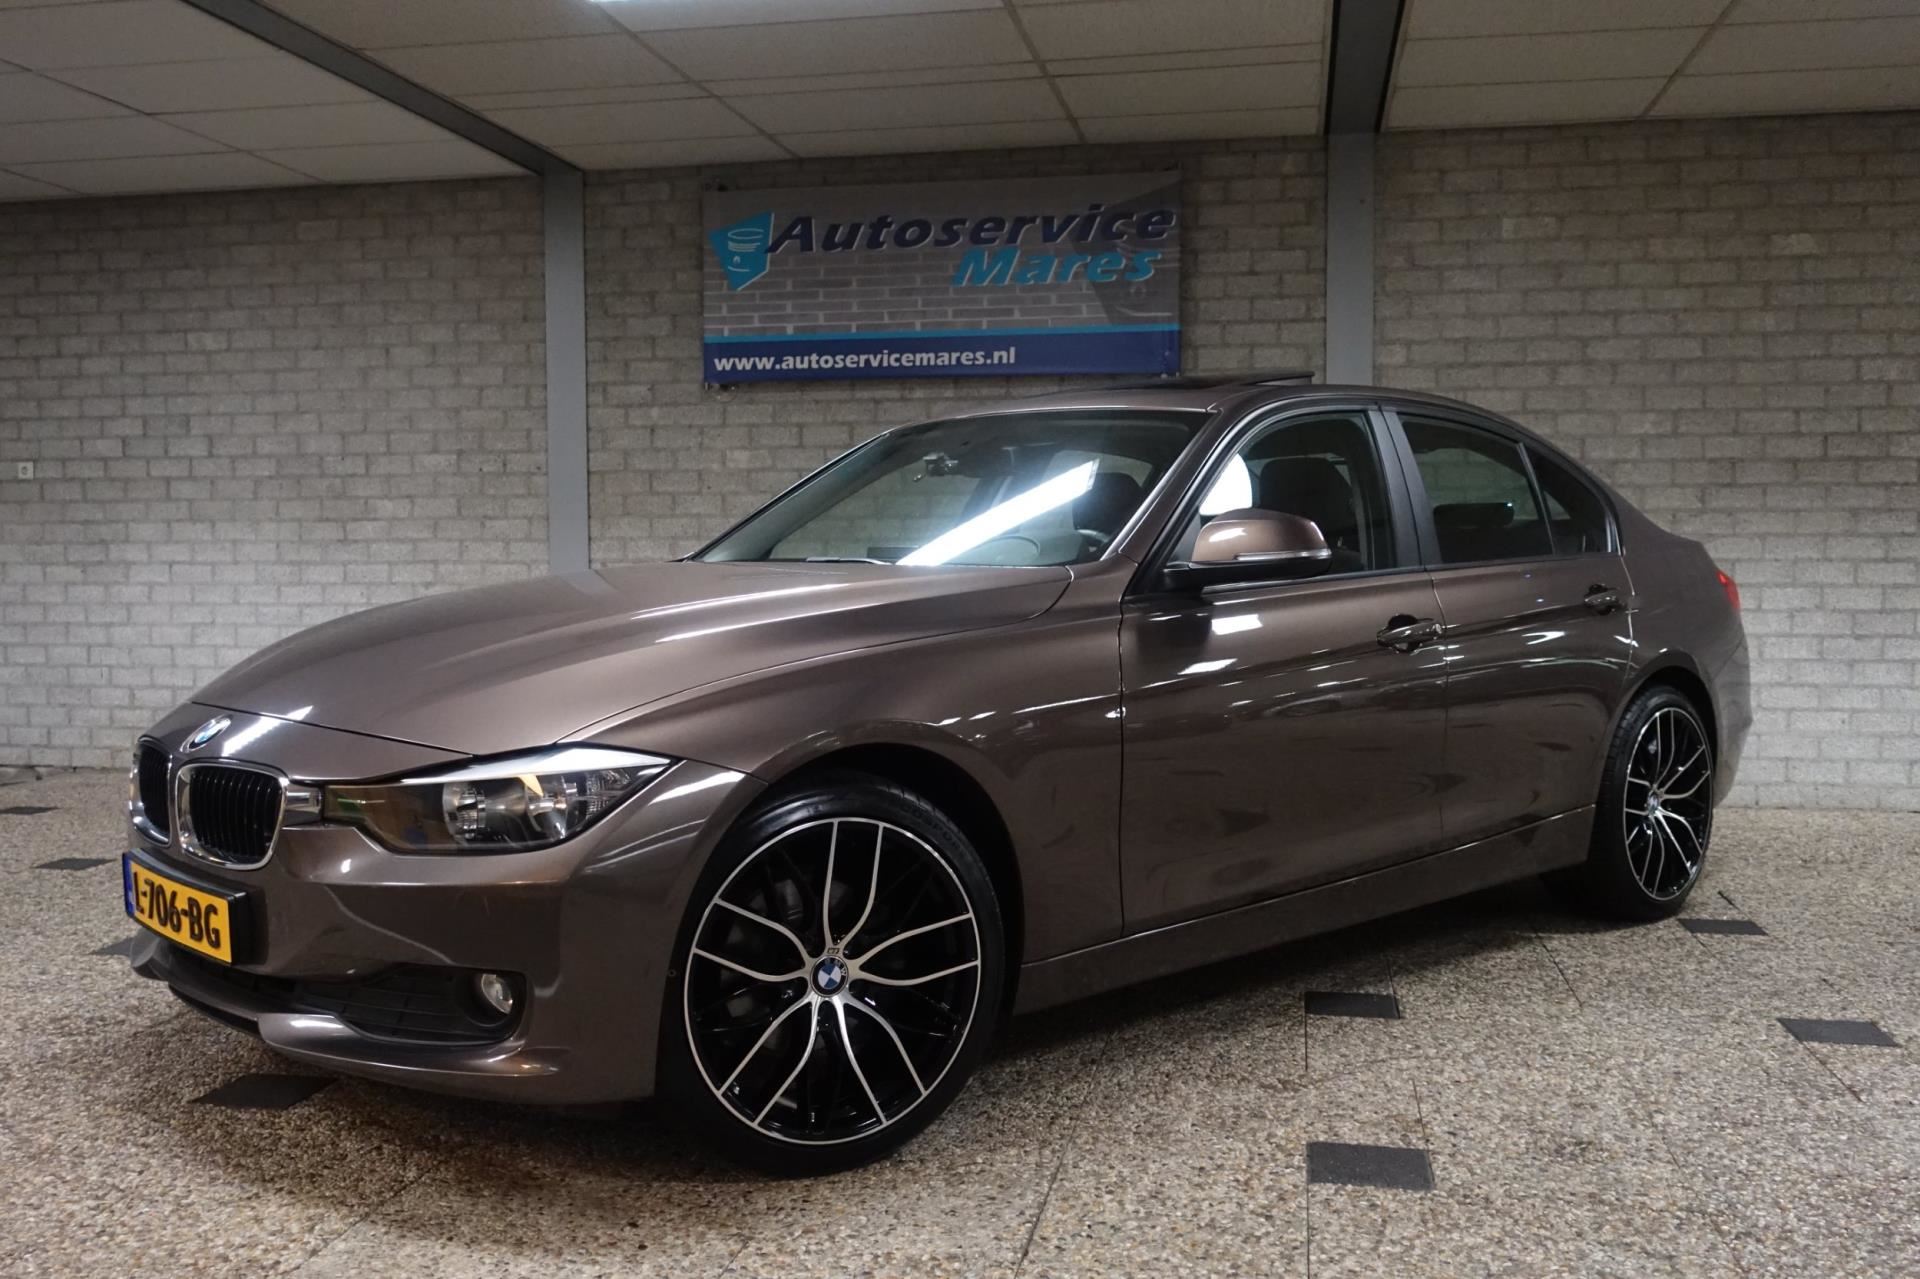 BMW 3-serie - 316i Edition, Automaat, 136 PK, PDC, airco, schuifdak, cruise, 17 LM, KM Benzine uit 2013 - www.autoservicemares.nl